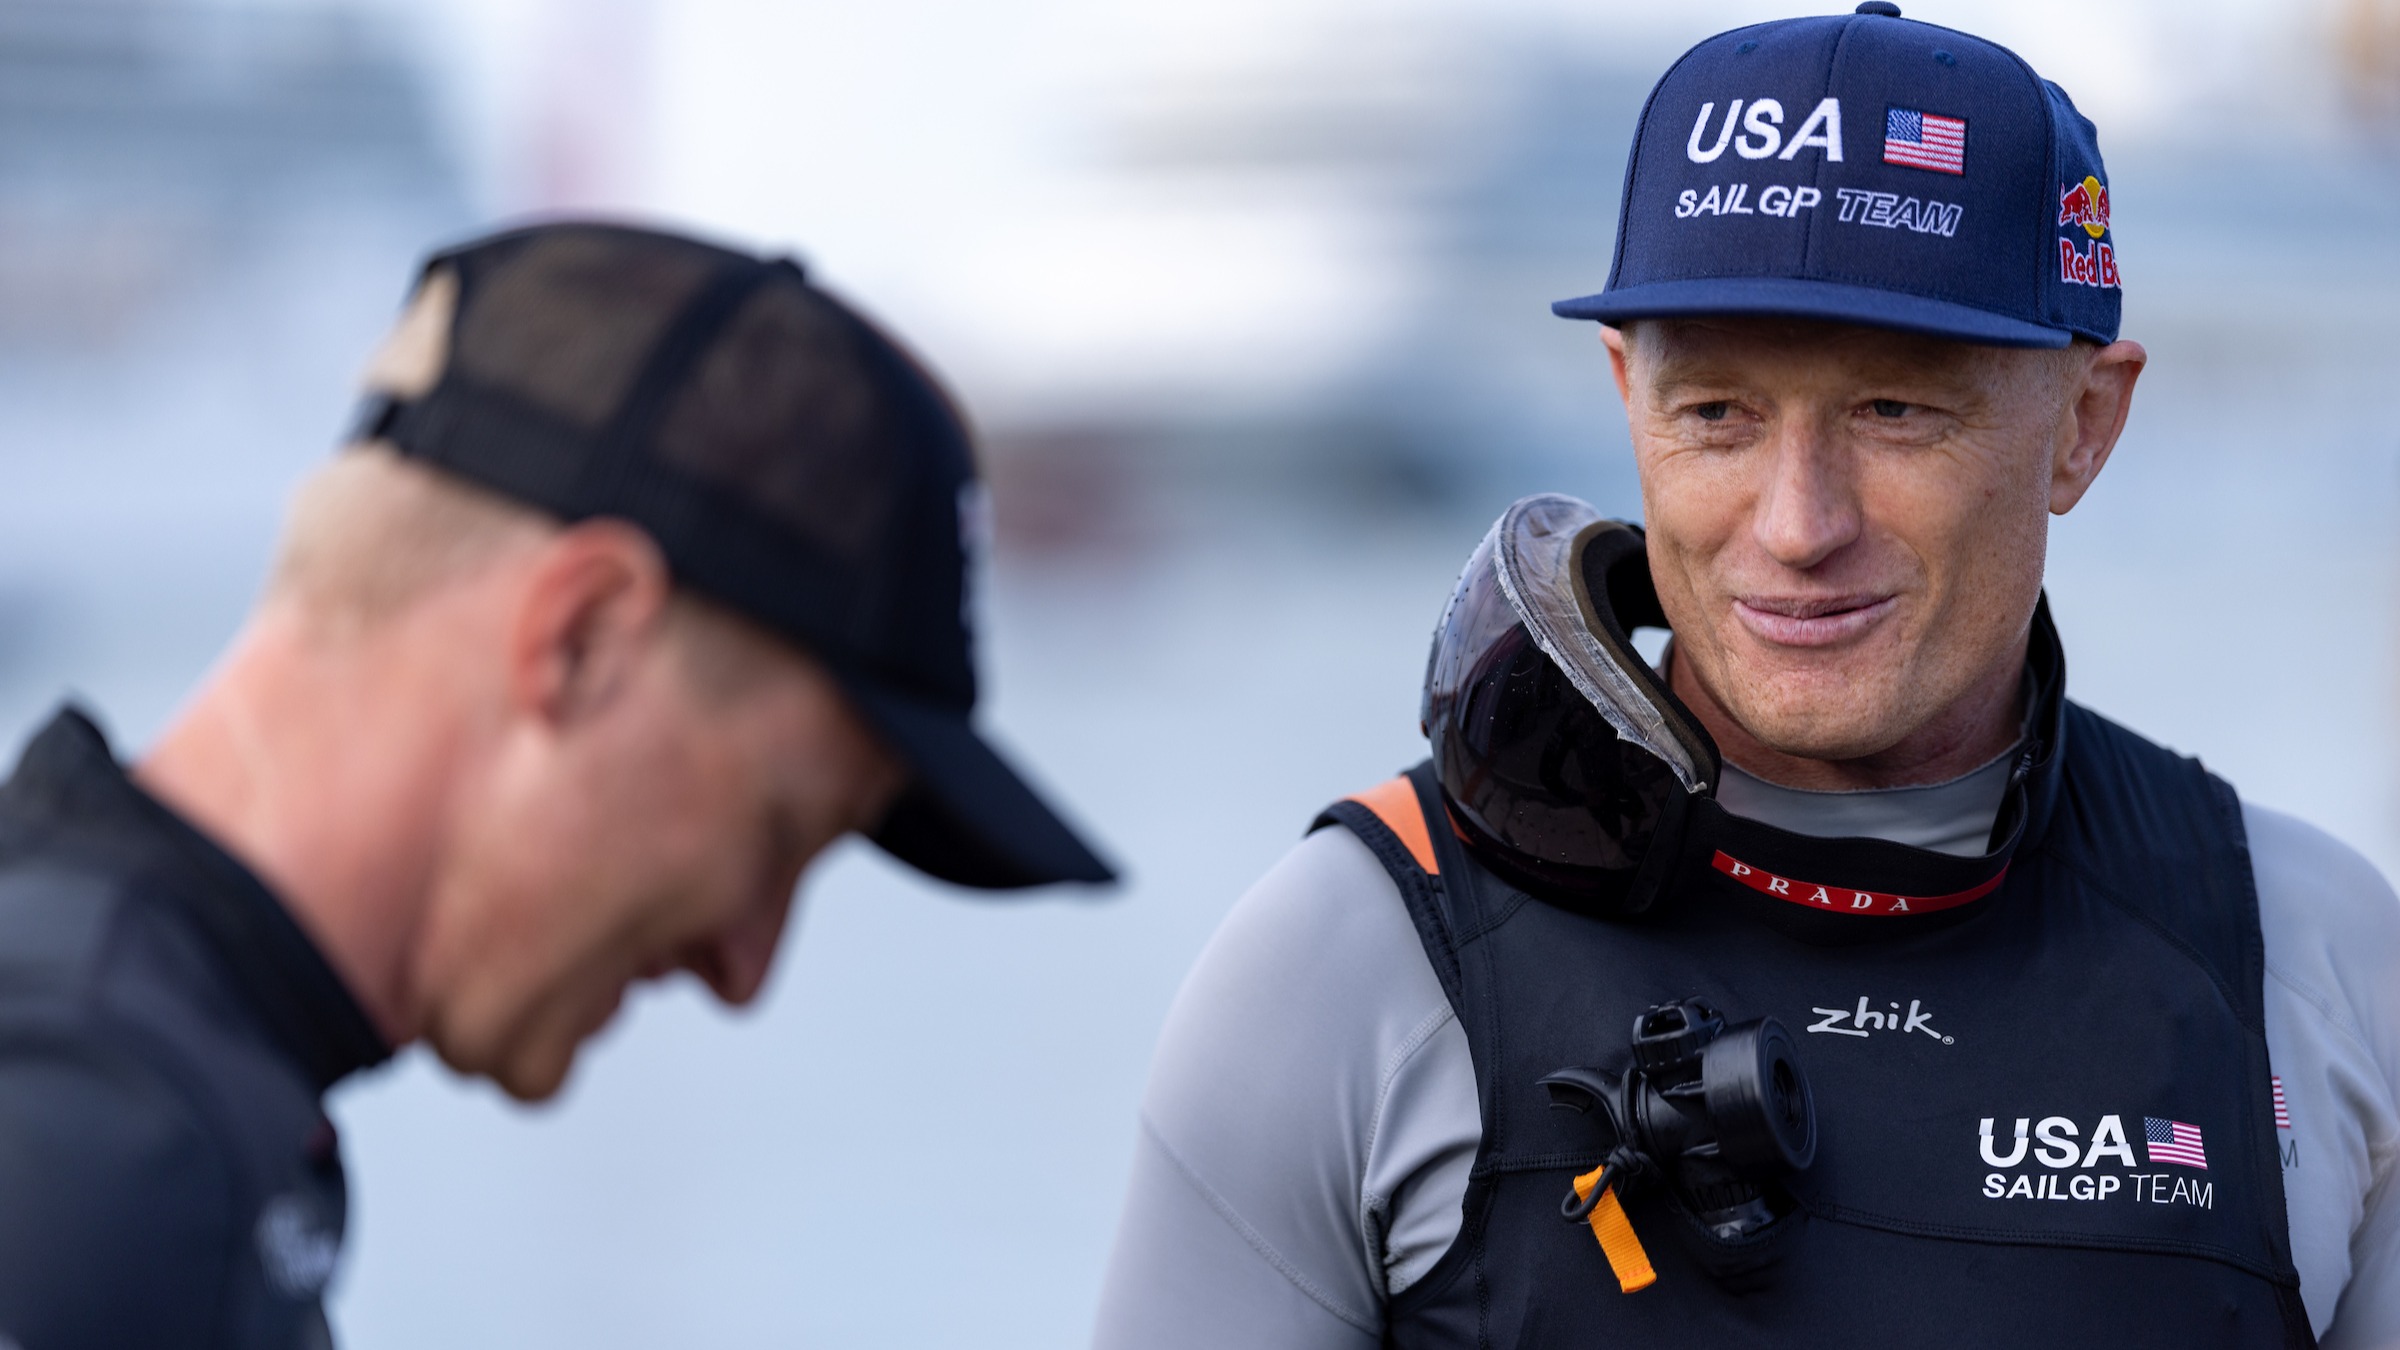 Season 4 // Jimmy Spithill in Cadiz speaking to Nicolai Sehested